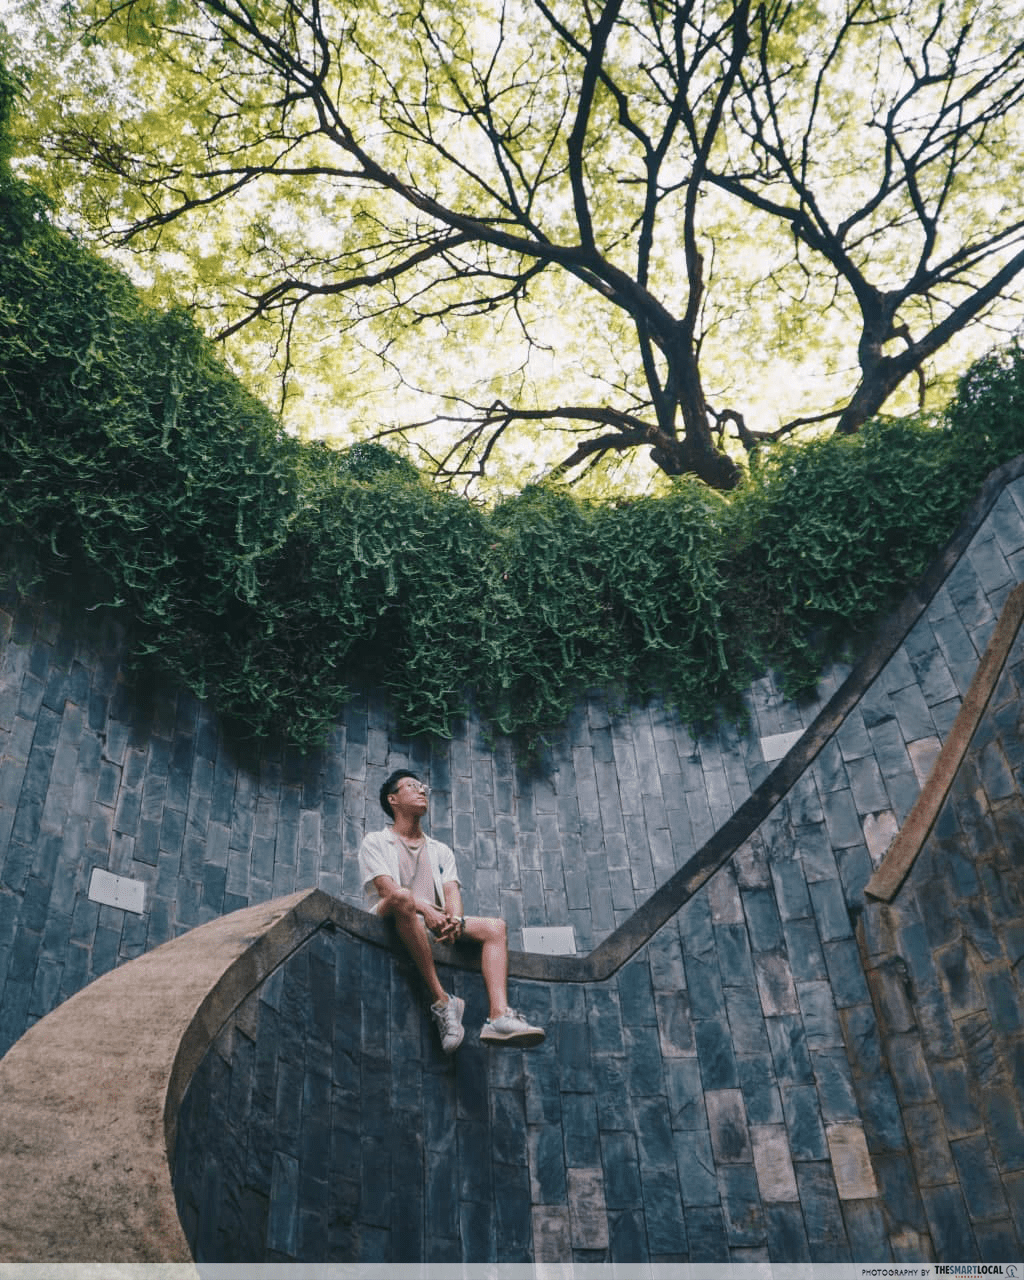 instagrammable things to do singapore - fort canning park